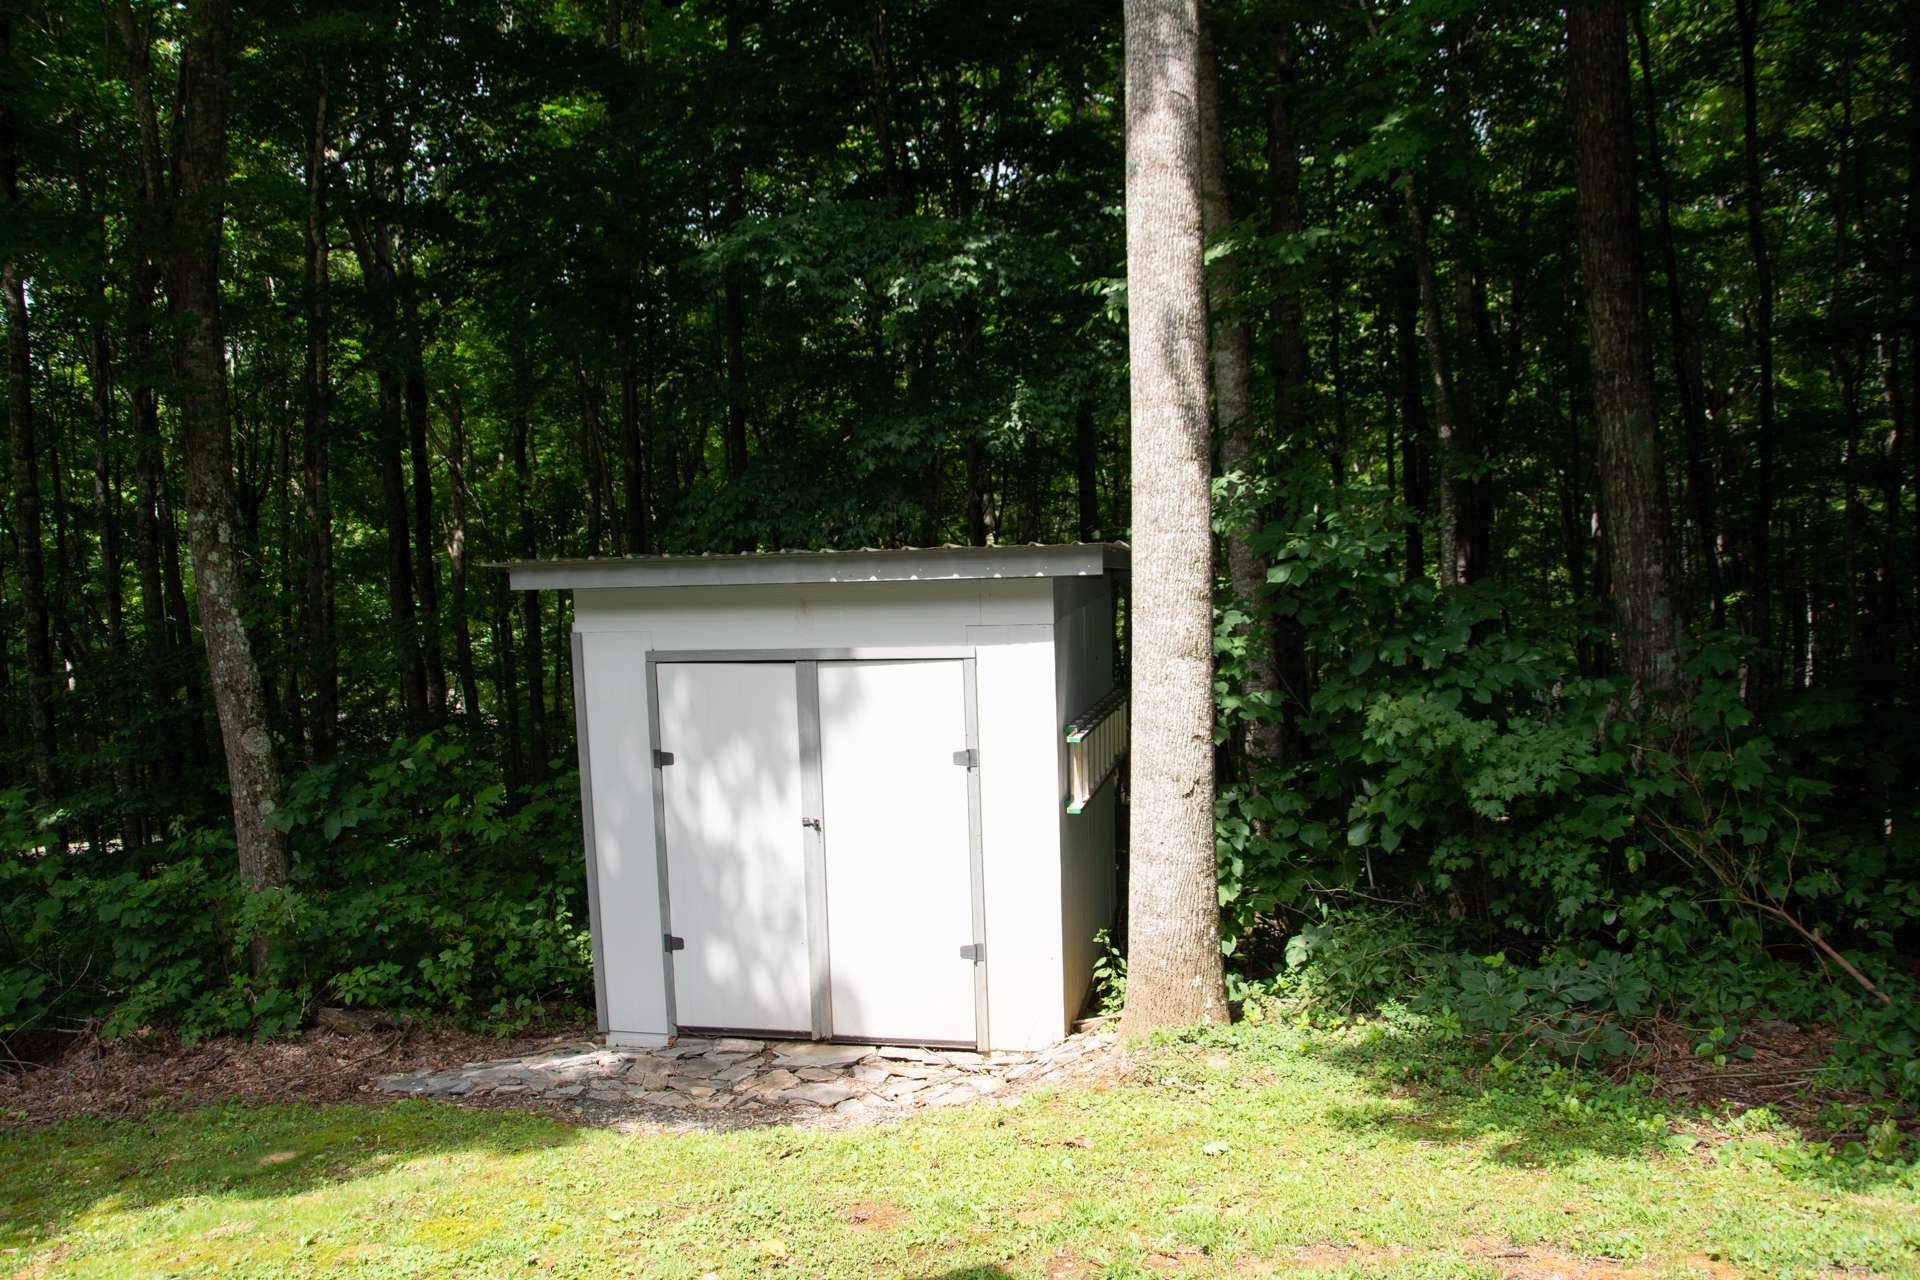 Also included is this outdoor storage building for your yard and gardening equipment.